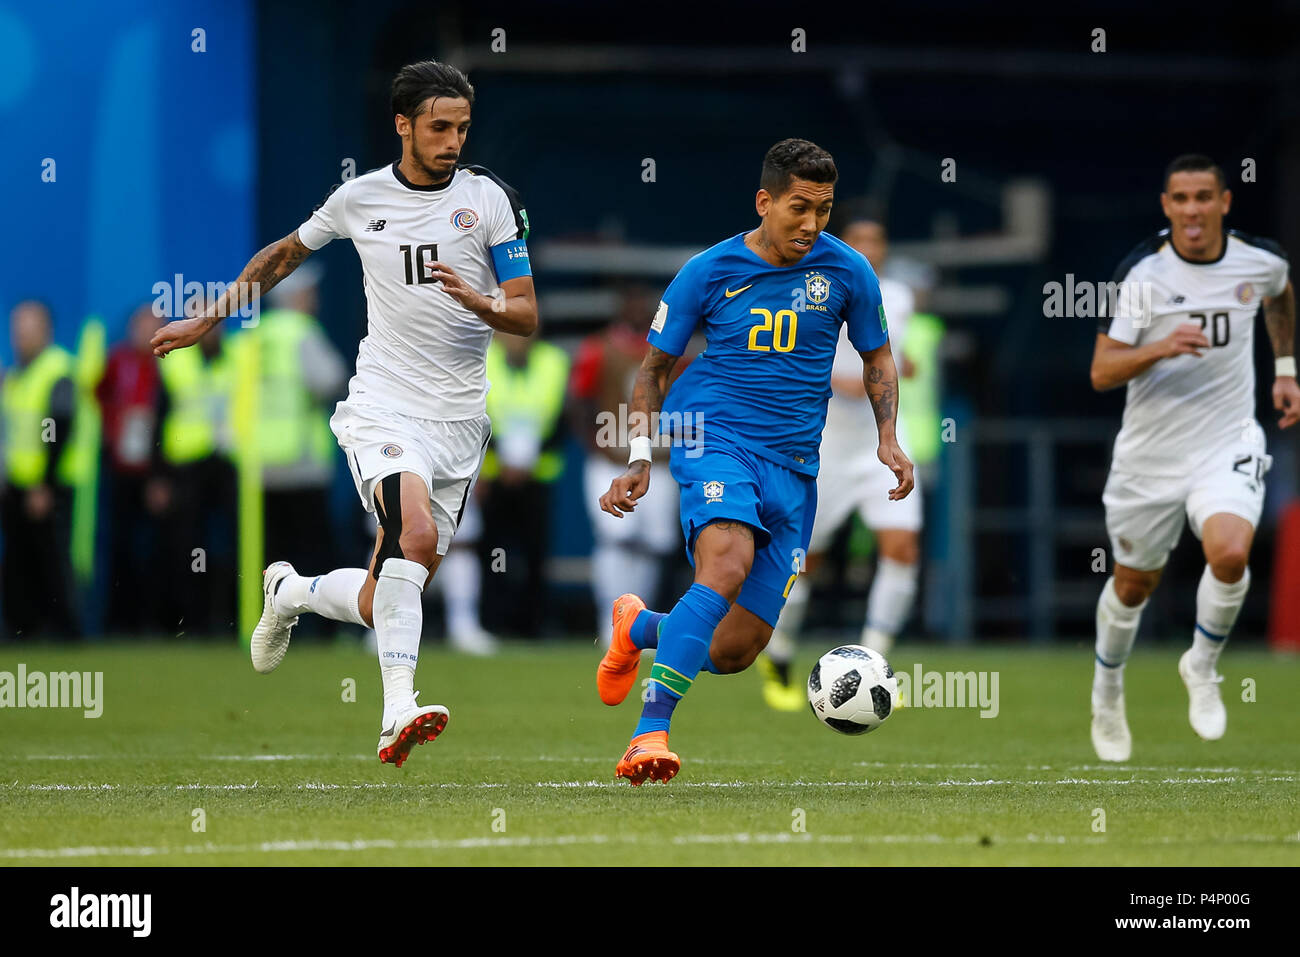 Saint Petersburg, Russia. 22nd June 2018. Bryan Ruiz of Costa Rica and Roberto Firmino of Brazil during the 2018 FIFA World Cup Group E match between Brazil and Costa Rica at Saint Petersburg Stadium on June 22nd 2018 in Saint Petersburg, Russia. (Photo by Daniel Chesterton/phcimages.com) Credit: PHC Images/Alamy Live News Stock Photo